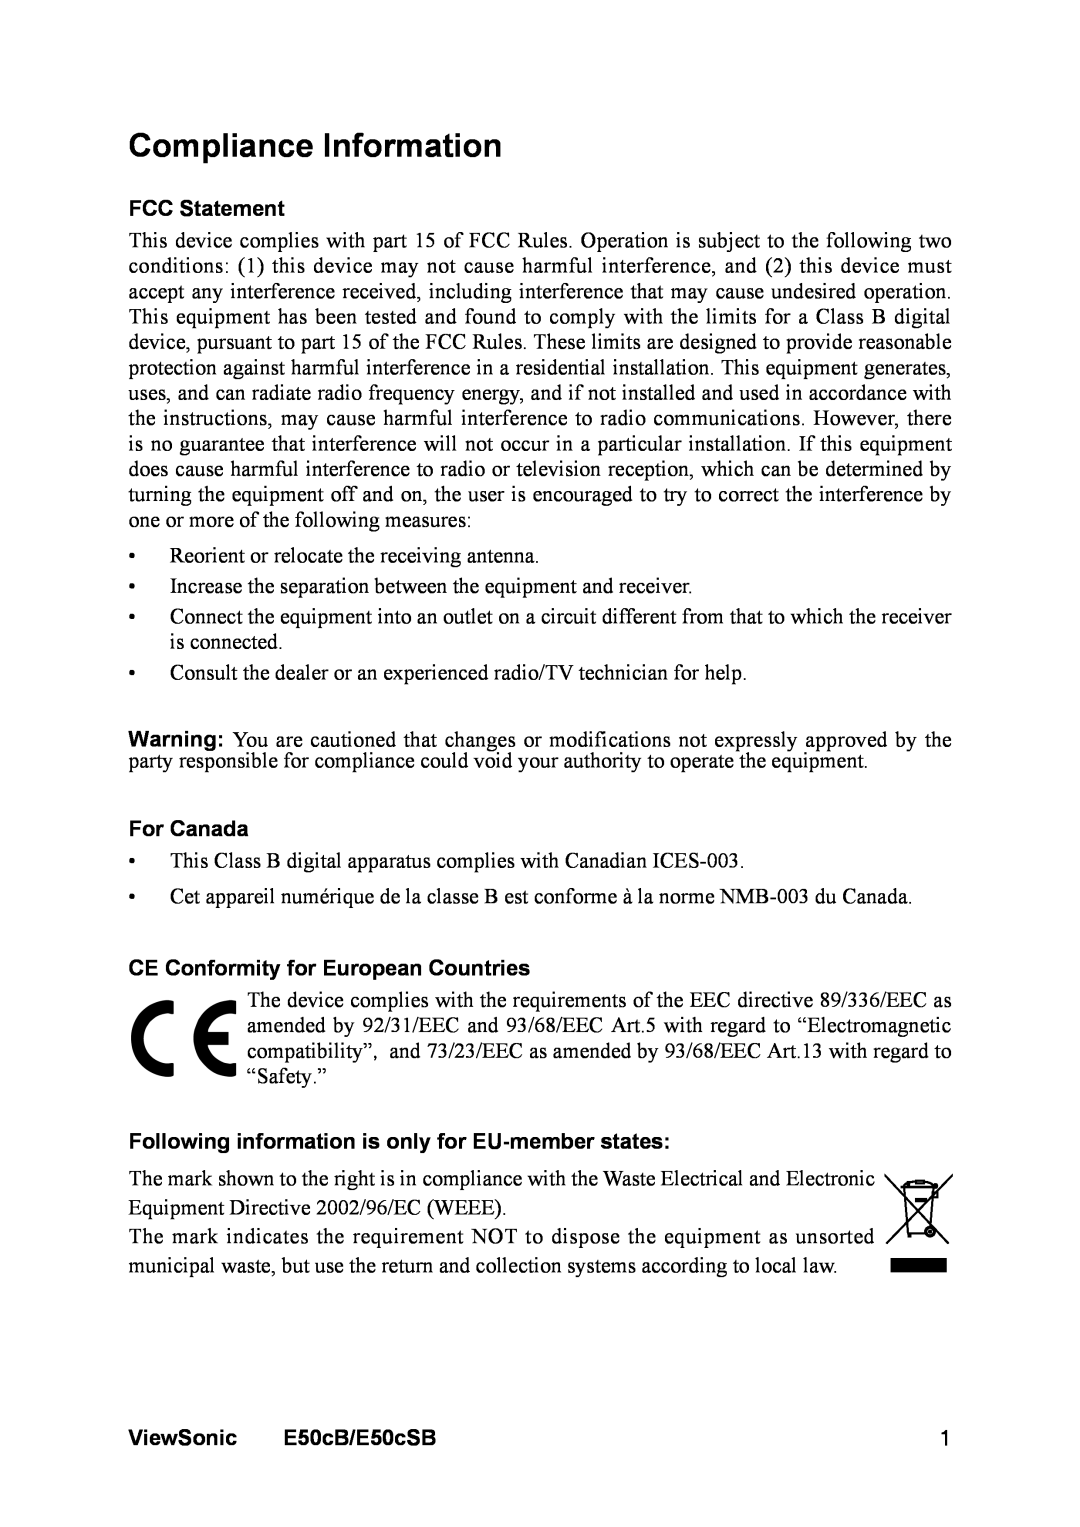 ViewSonic E50cB manual Compliance Information, FCC Statement, For Canada, CE Conformity for European Countries, ViewSonic 